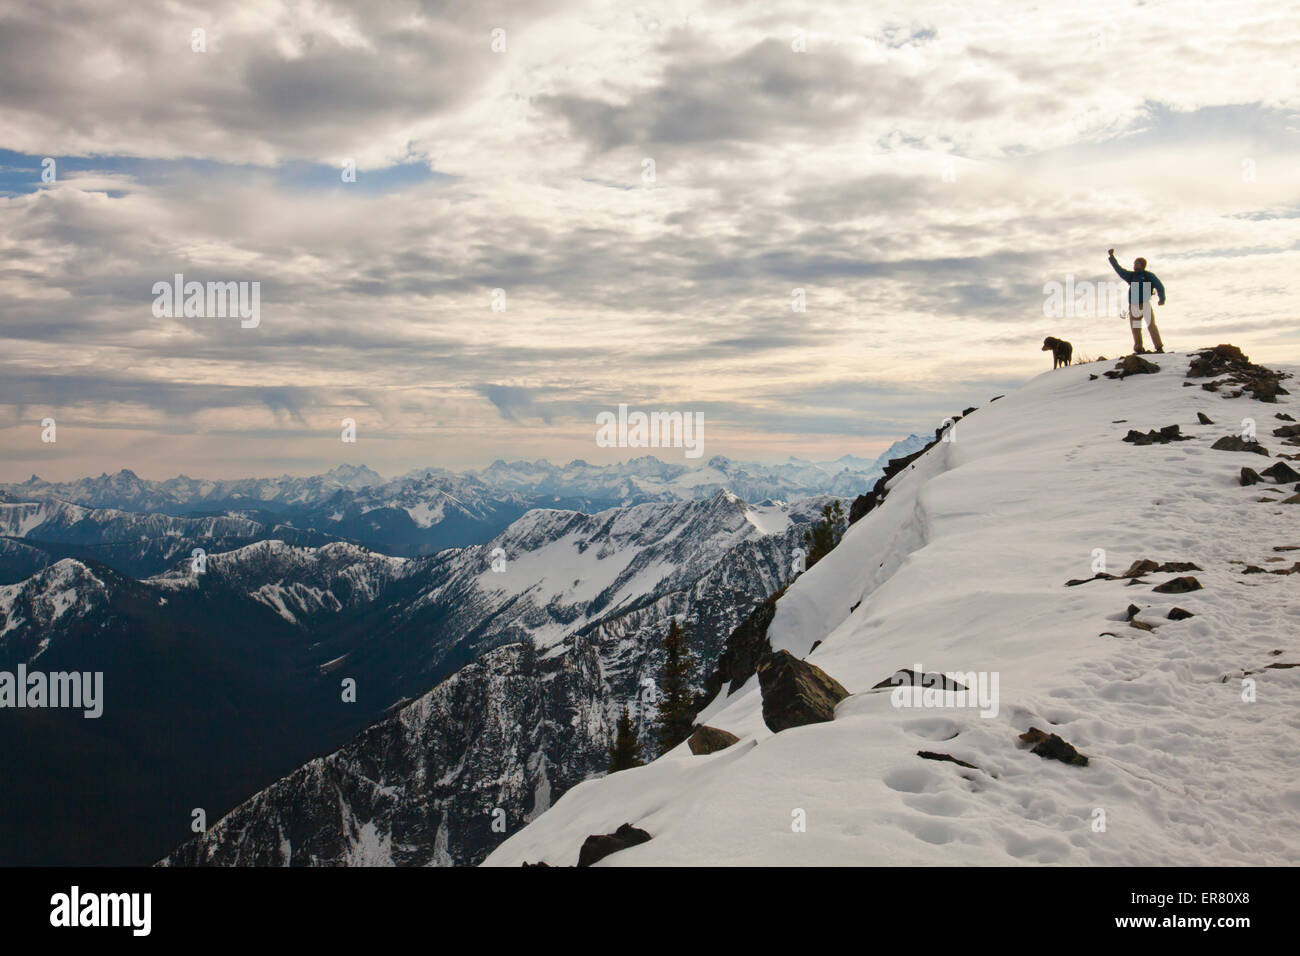 A backpacker poses for a picture with his dog in the Cascade Mountain Range. Stock Photo